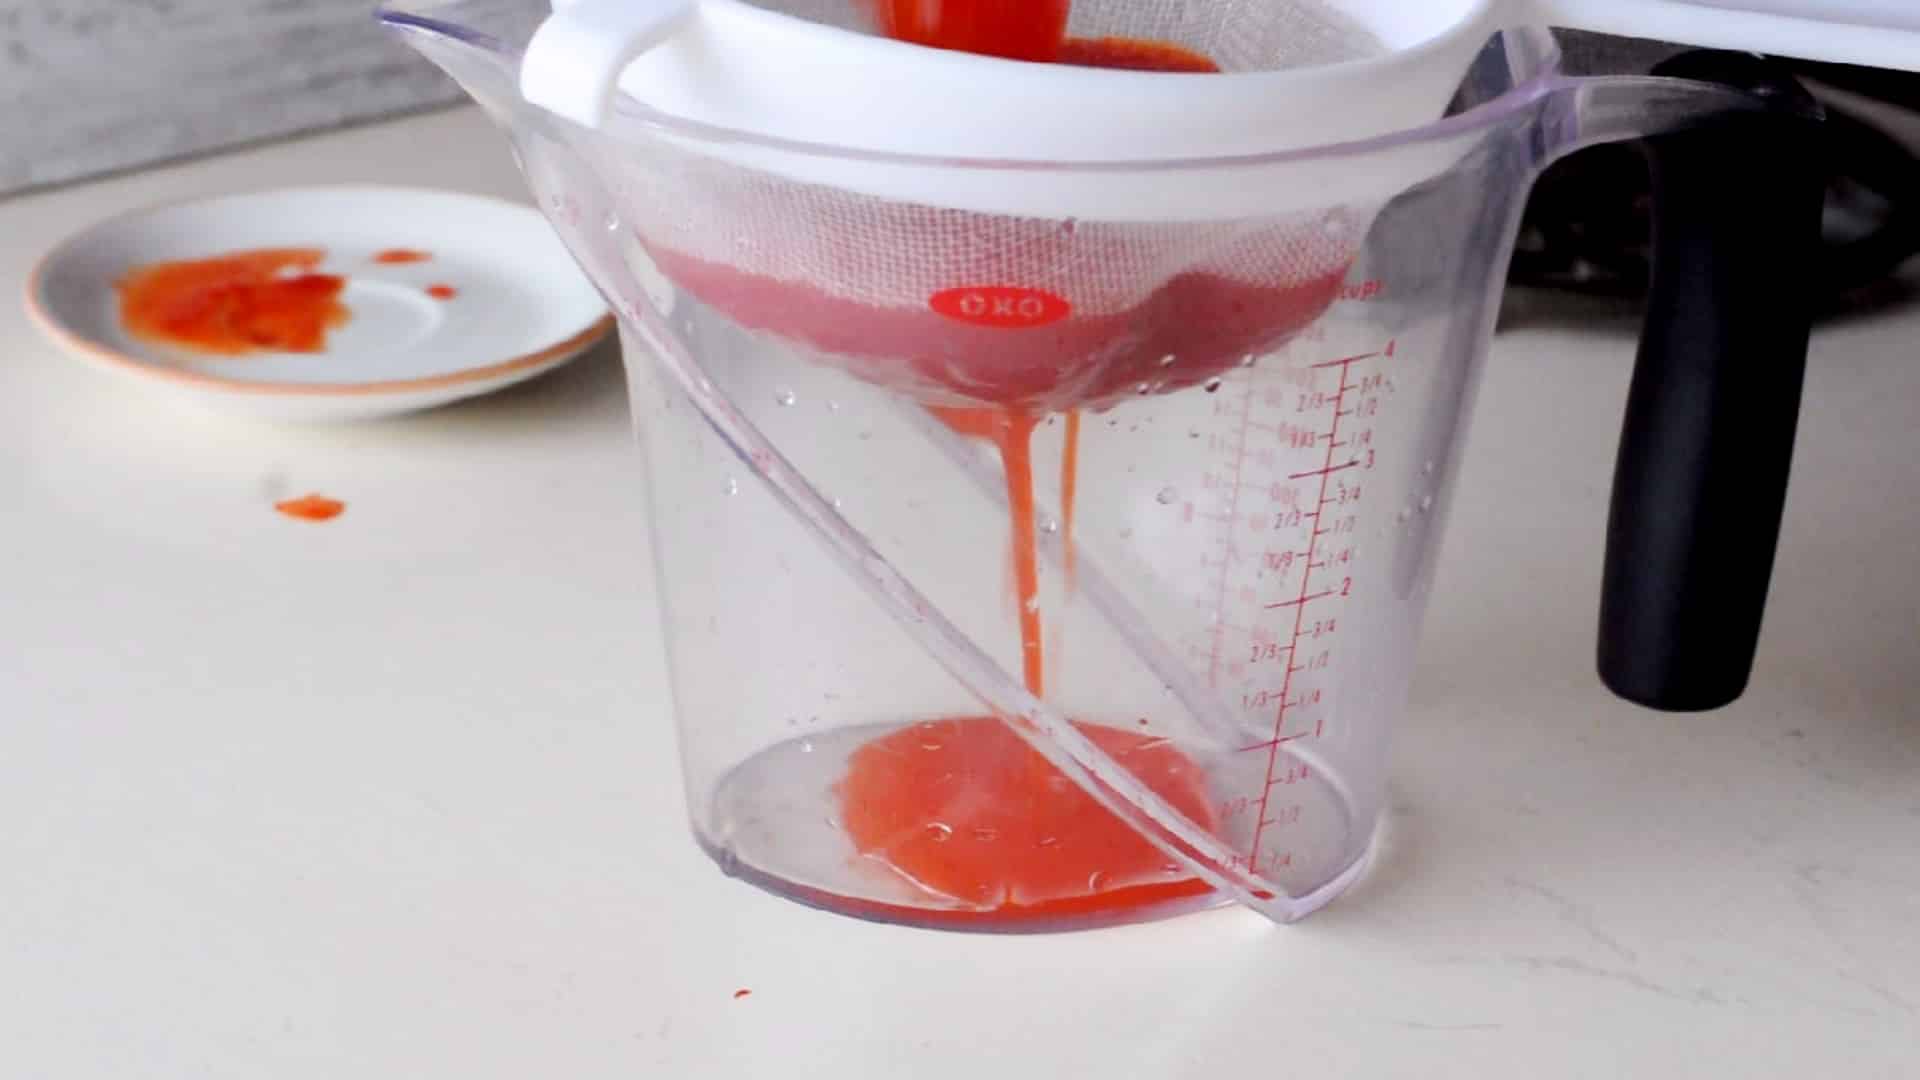 filtering the jelly